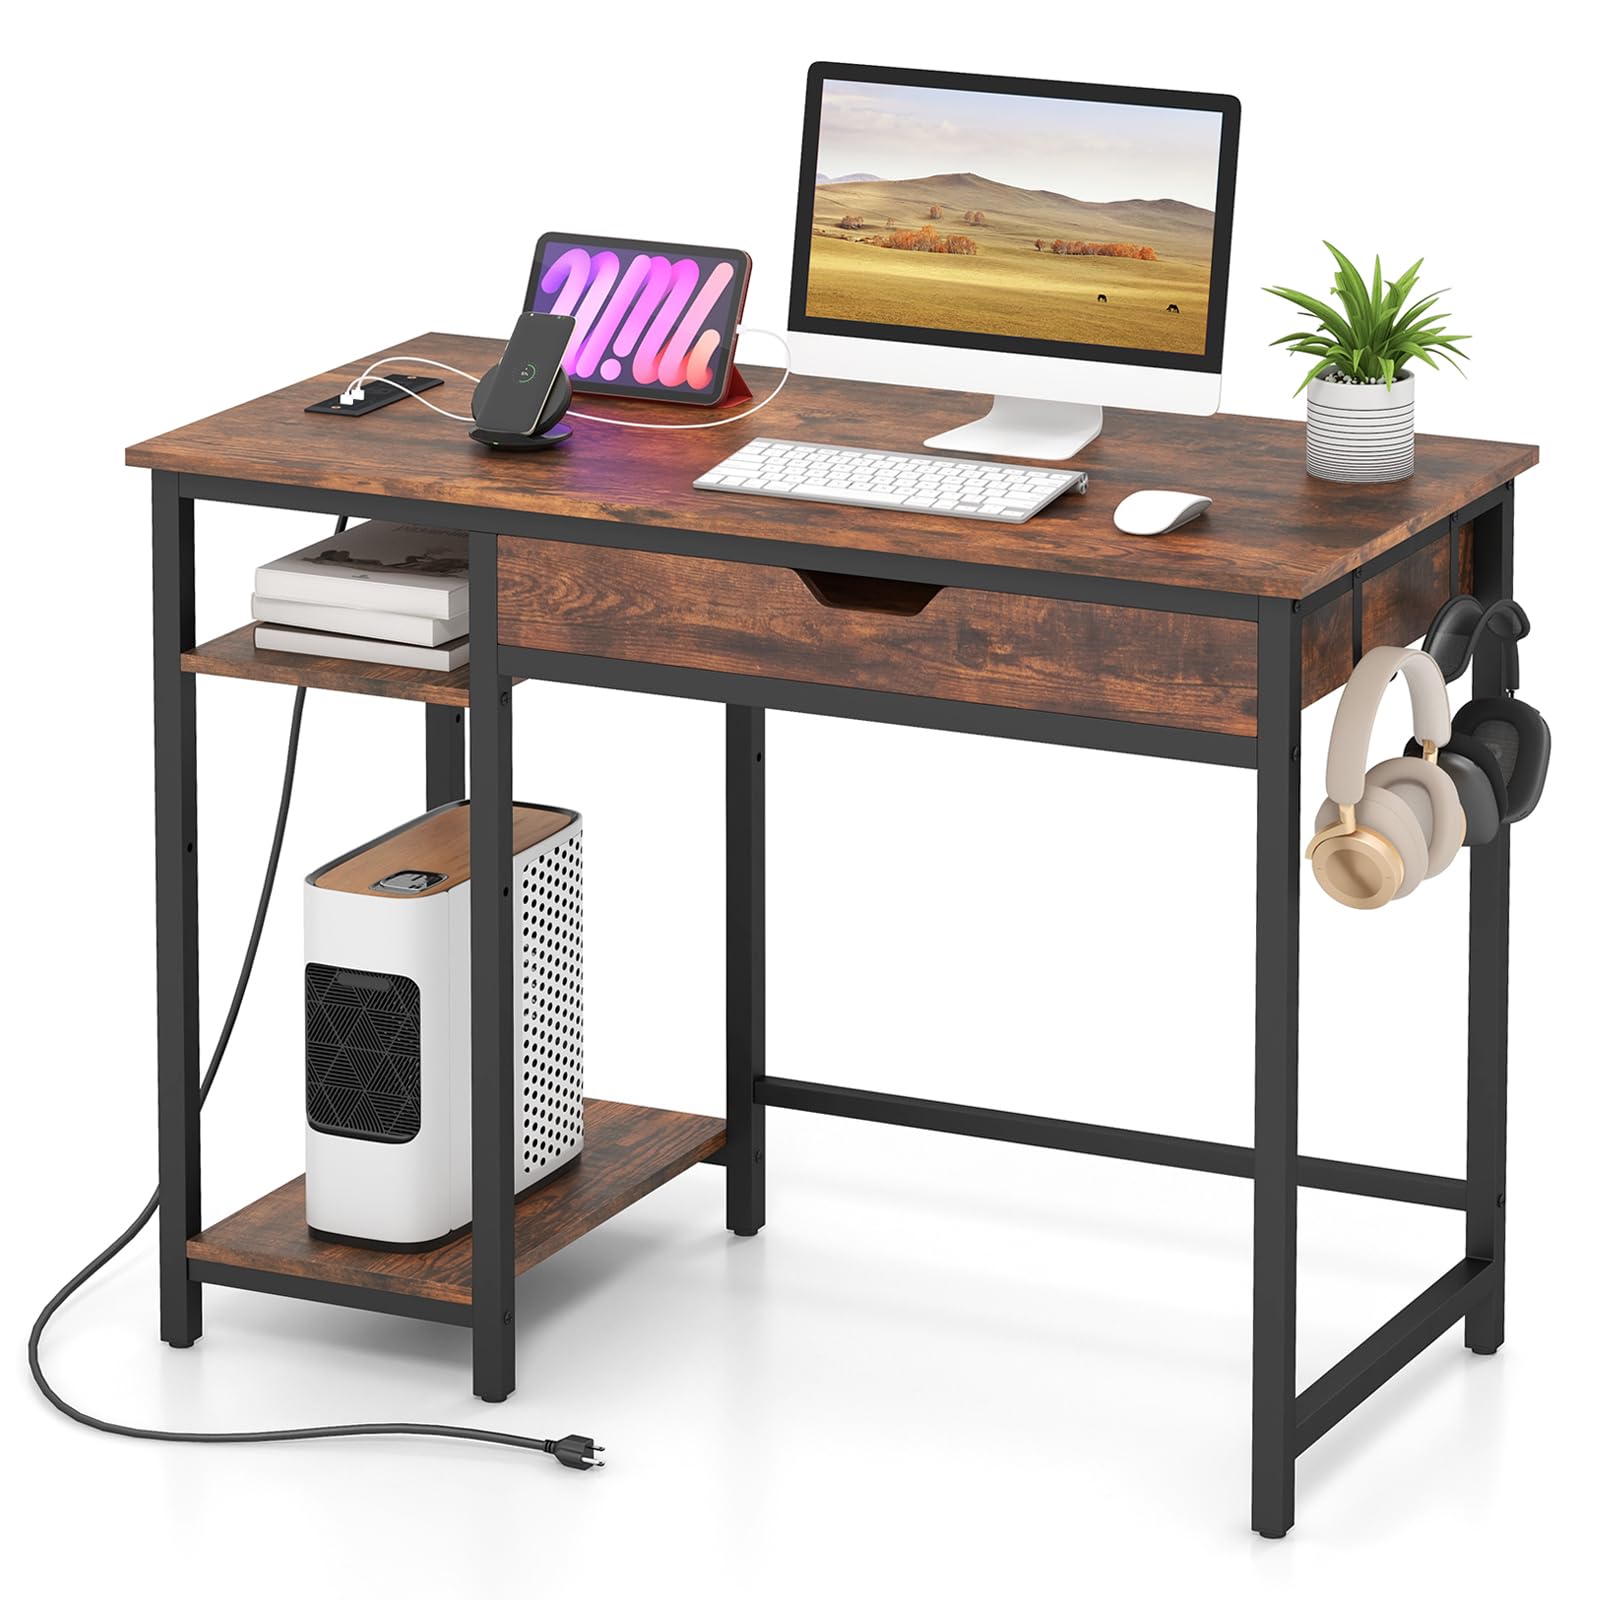 Giantex Computer Desk with Drawers and Power Outlets